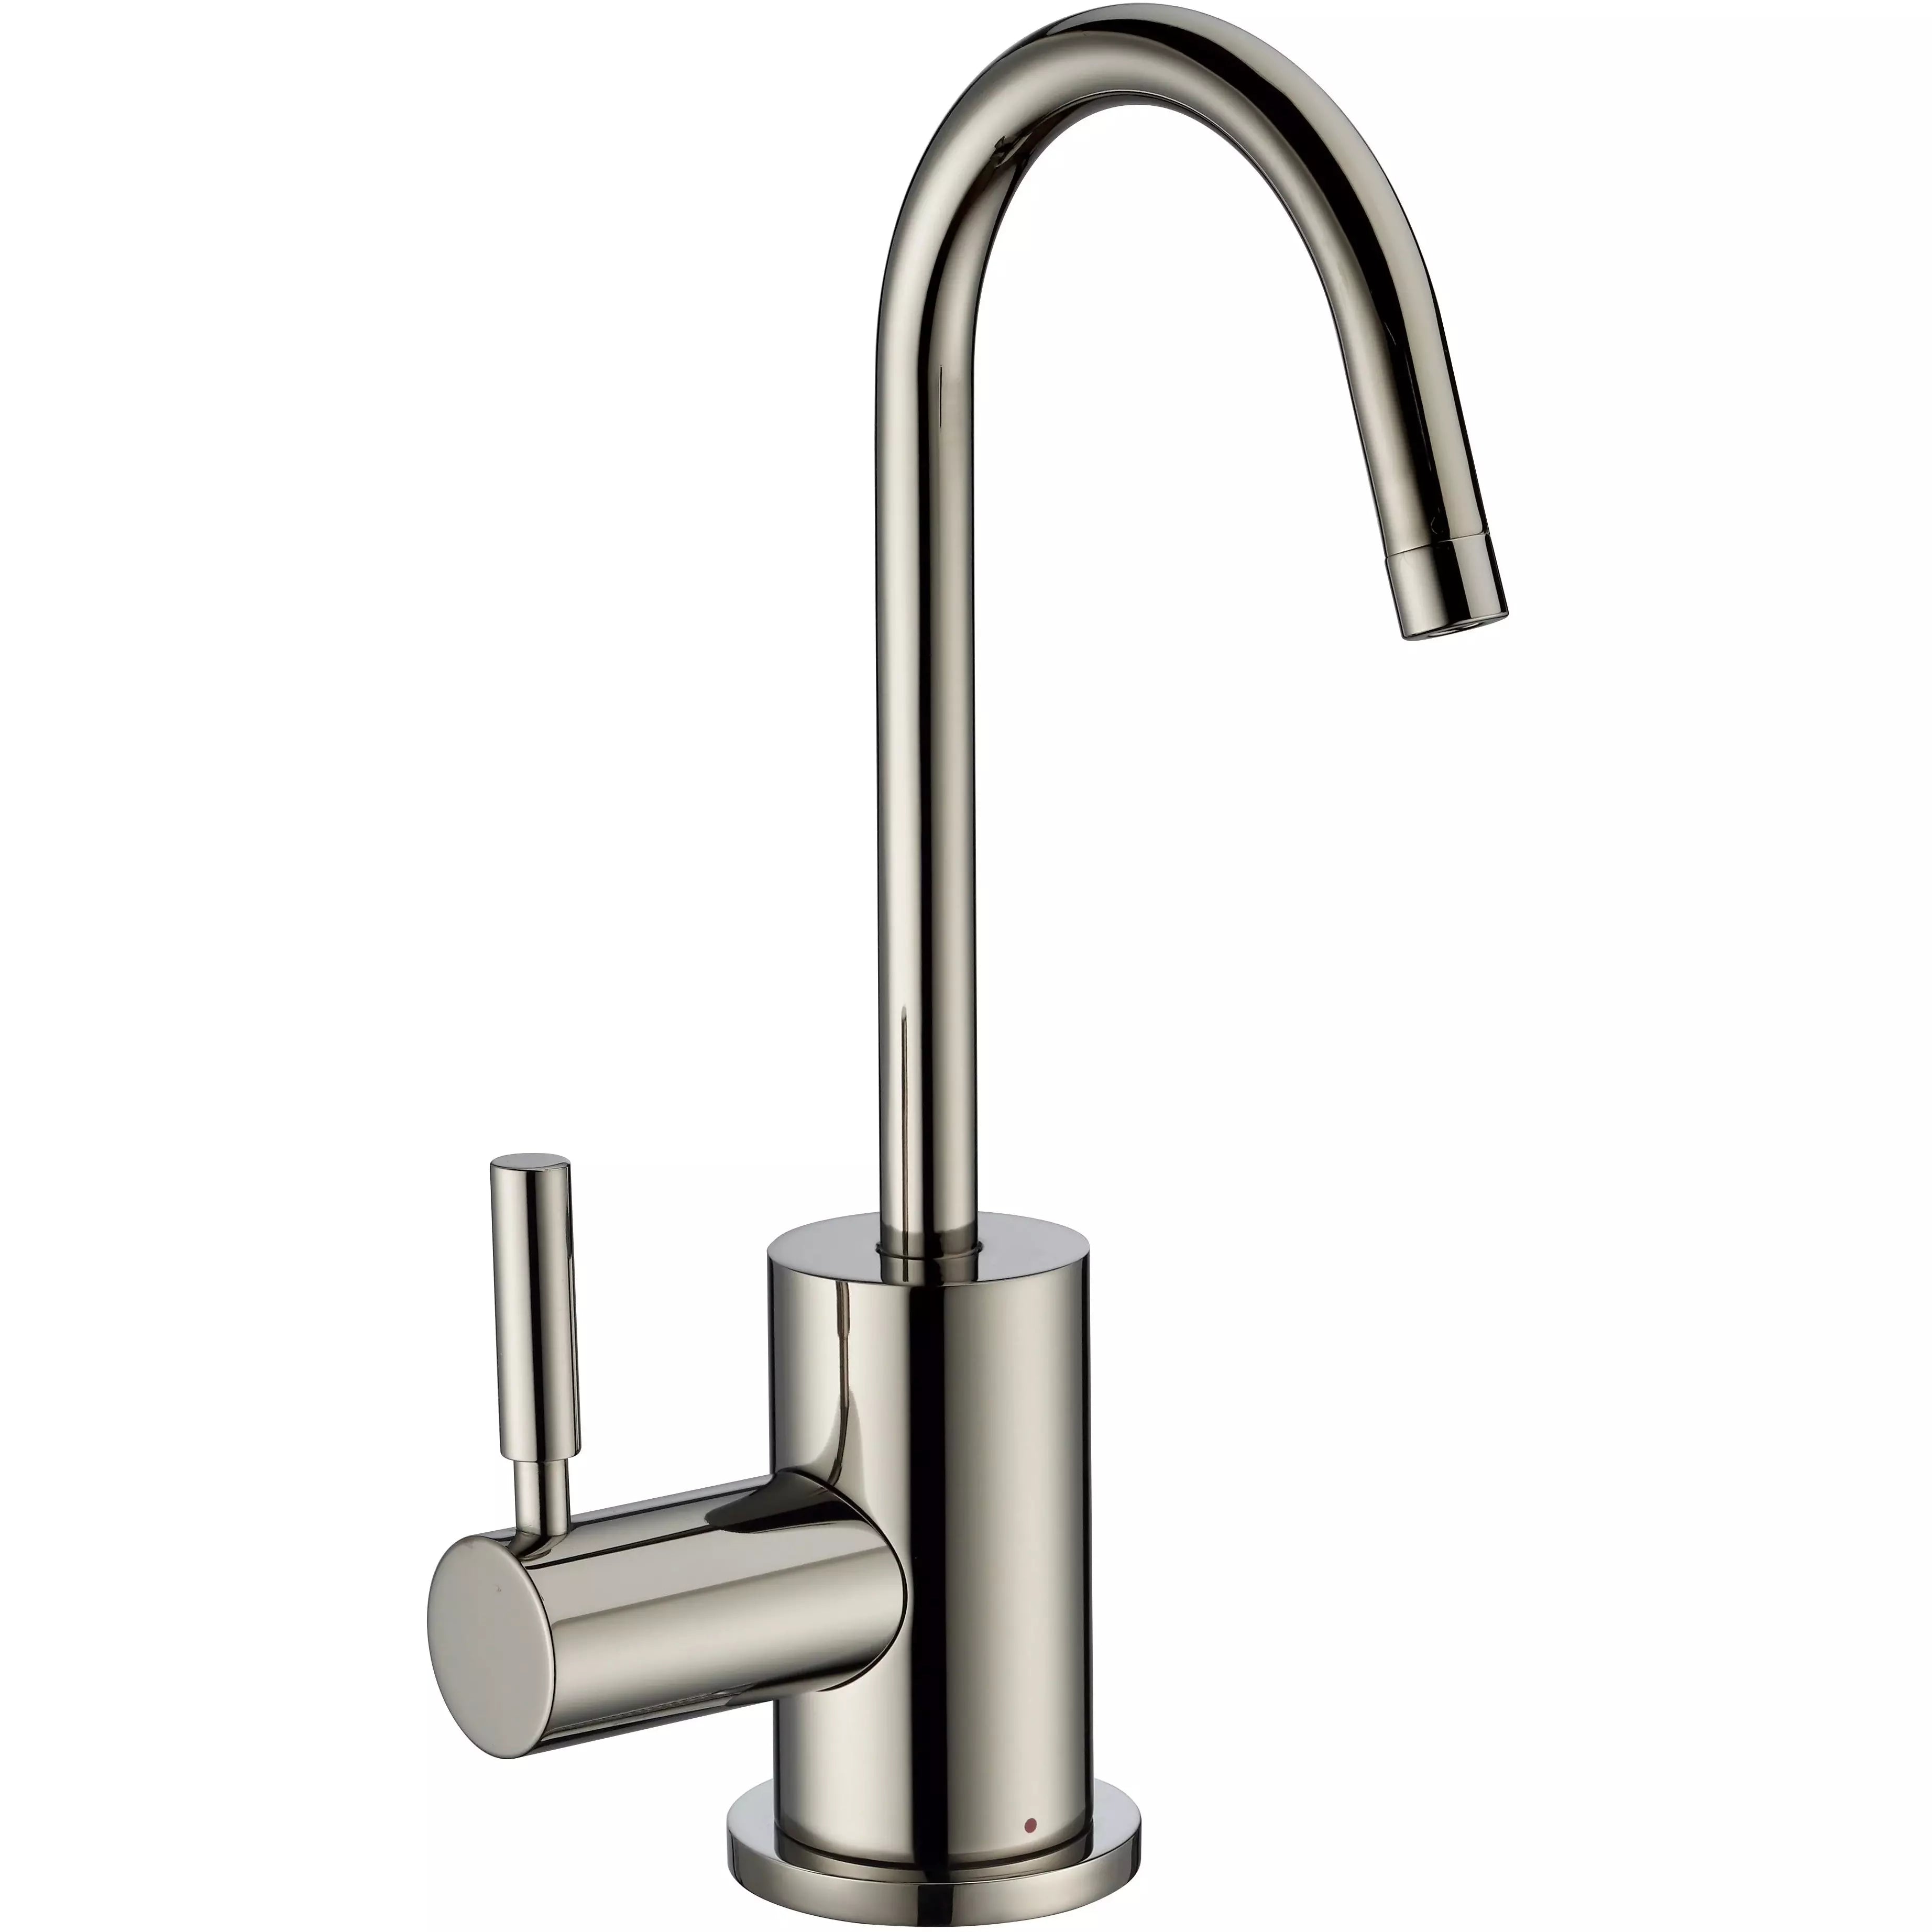 WHITEHAUS Point of Use Instant Hot Water Drinking Faucet with Gooseneck Swivel Spout - WHFH-H1010